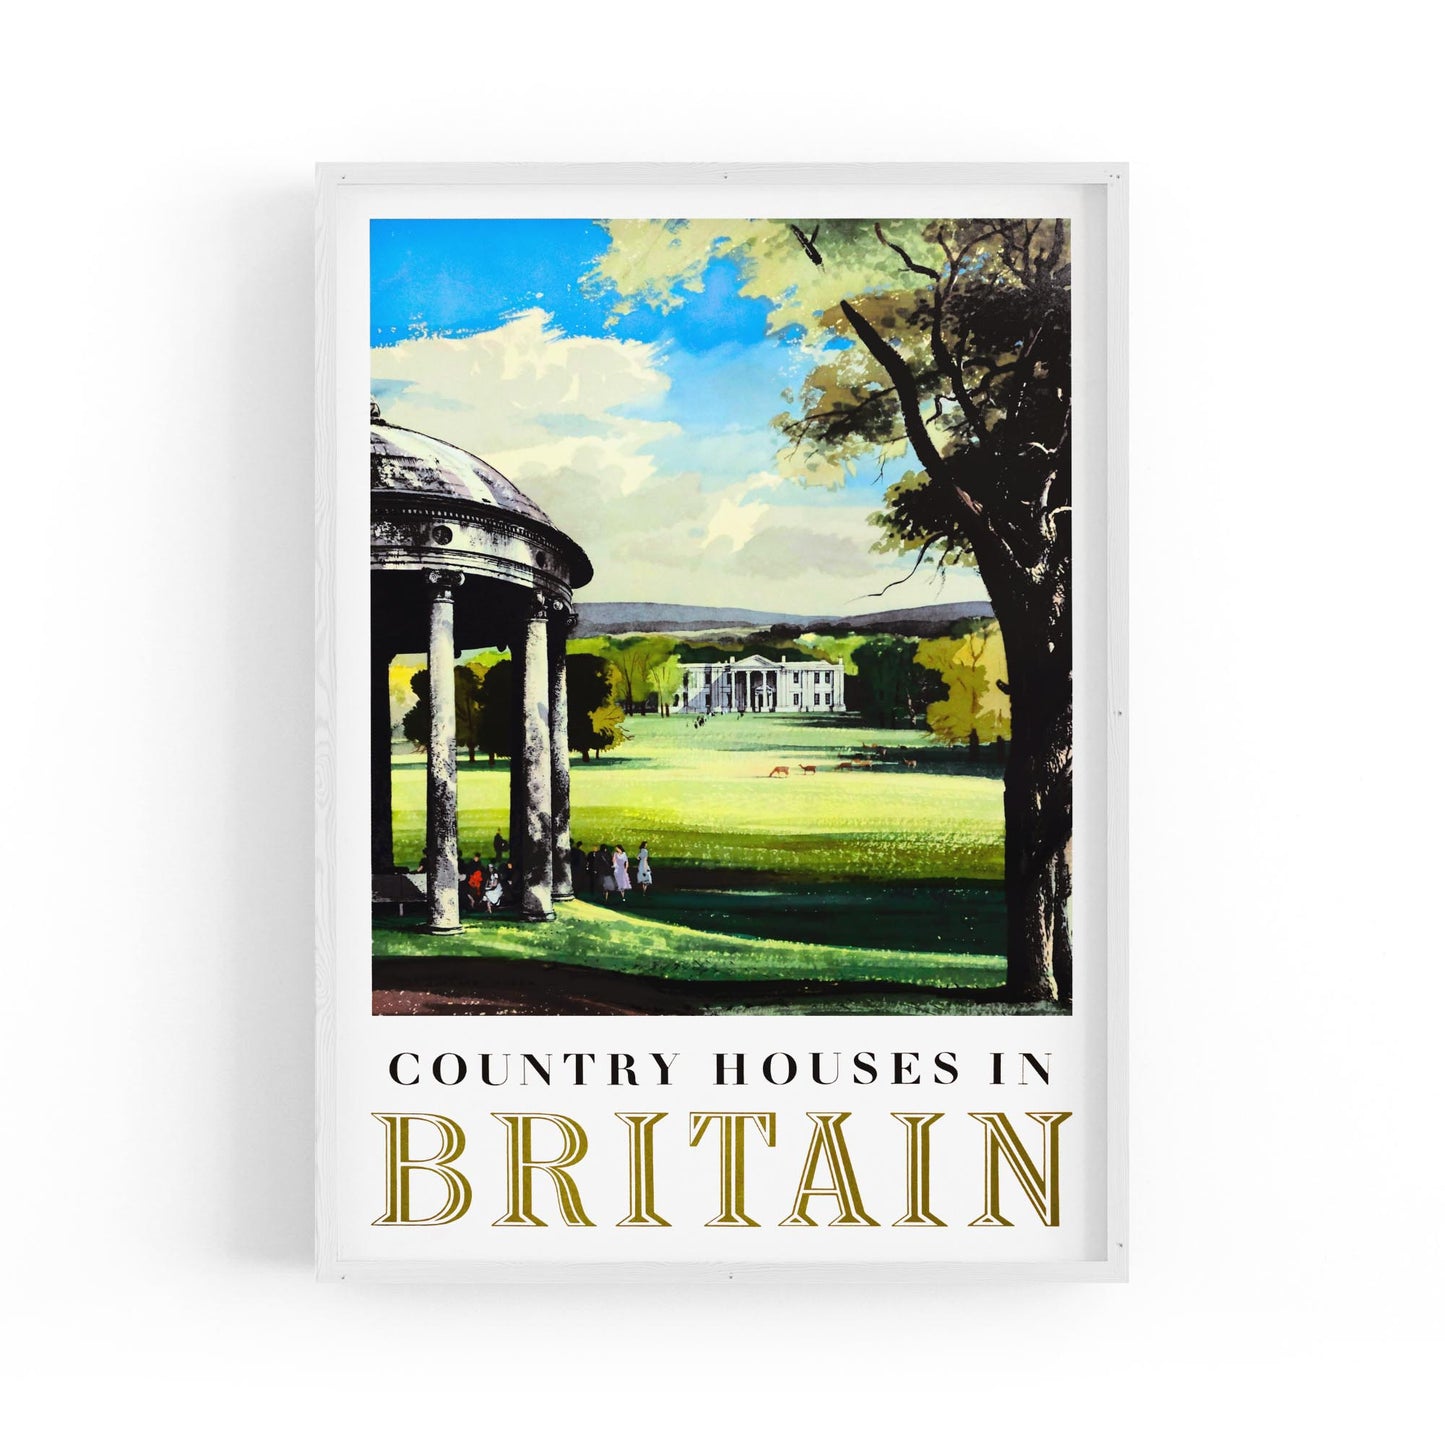 Country Houses In Britain by Rowland Hilder | Framed Vintage Travel Poster